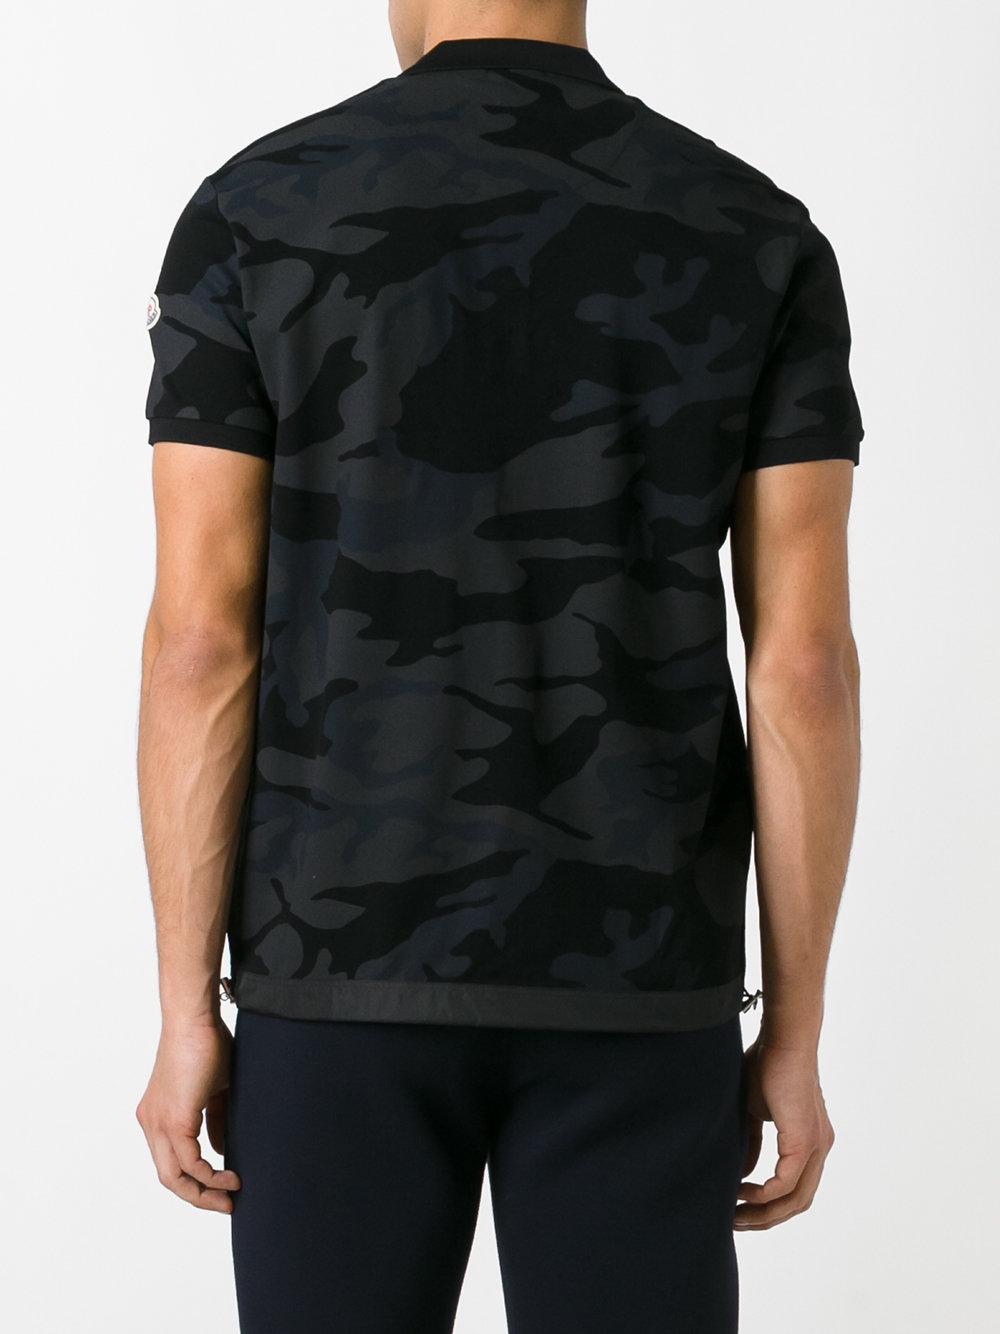 Moncler Cotton Camouflage Print Polo Shirt in Black for Men - Lyst